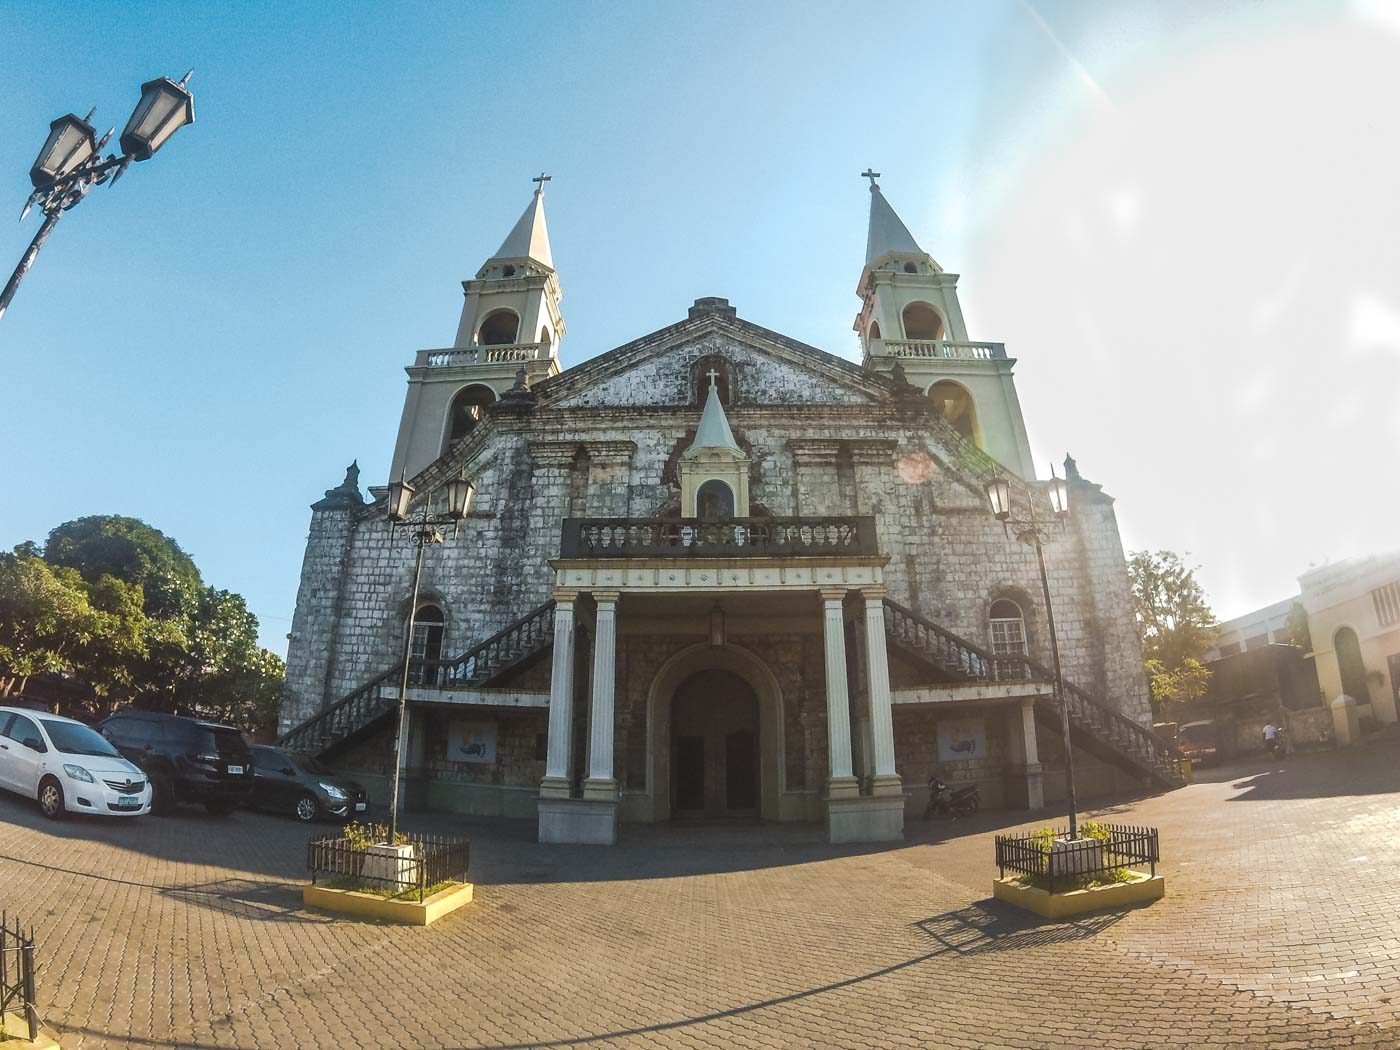 MARIAN. The only cathedral in the province, Jaro Cathedral is home to the miraculous image of Our Lady of the Candles which was canonically crowned by Saint John Paul II during his visit to Iloilo in 1981. Photo by Carl Don Berwin/Rappler 